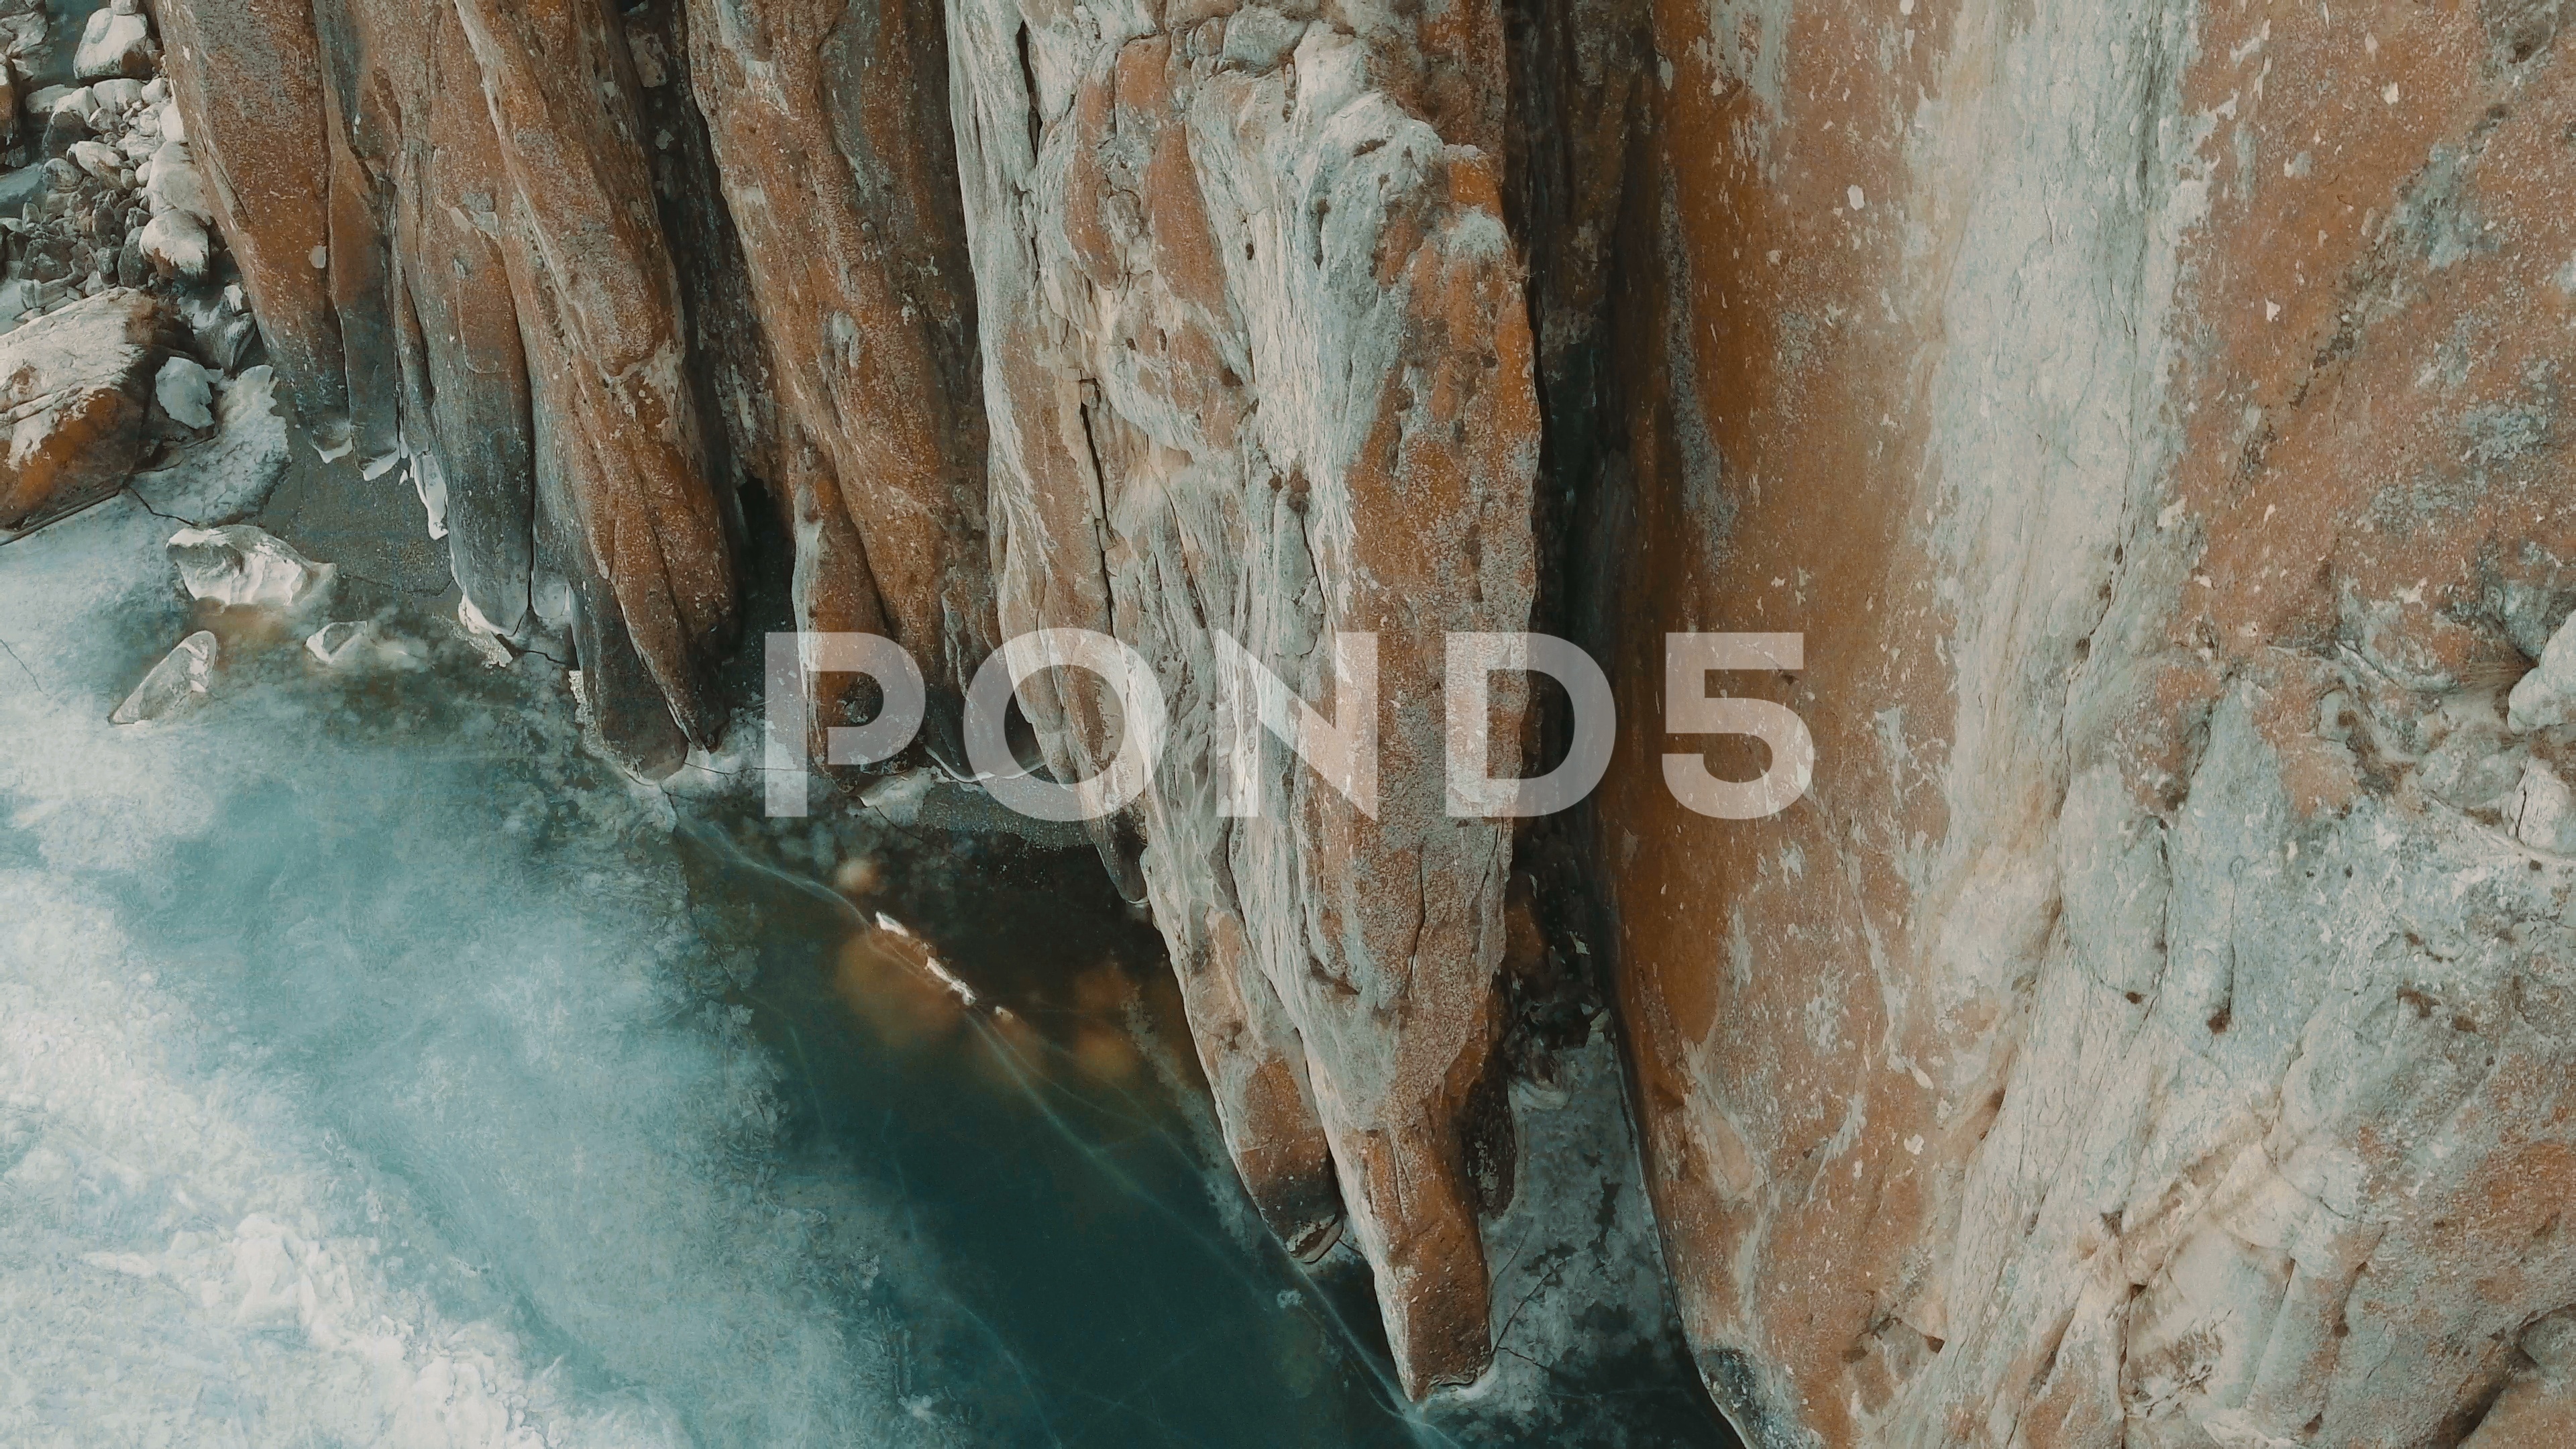 Video: Iced rocks winter landscape aerial view ~ #78156984